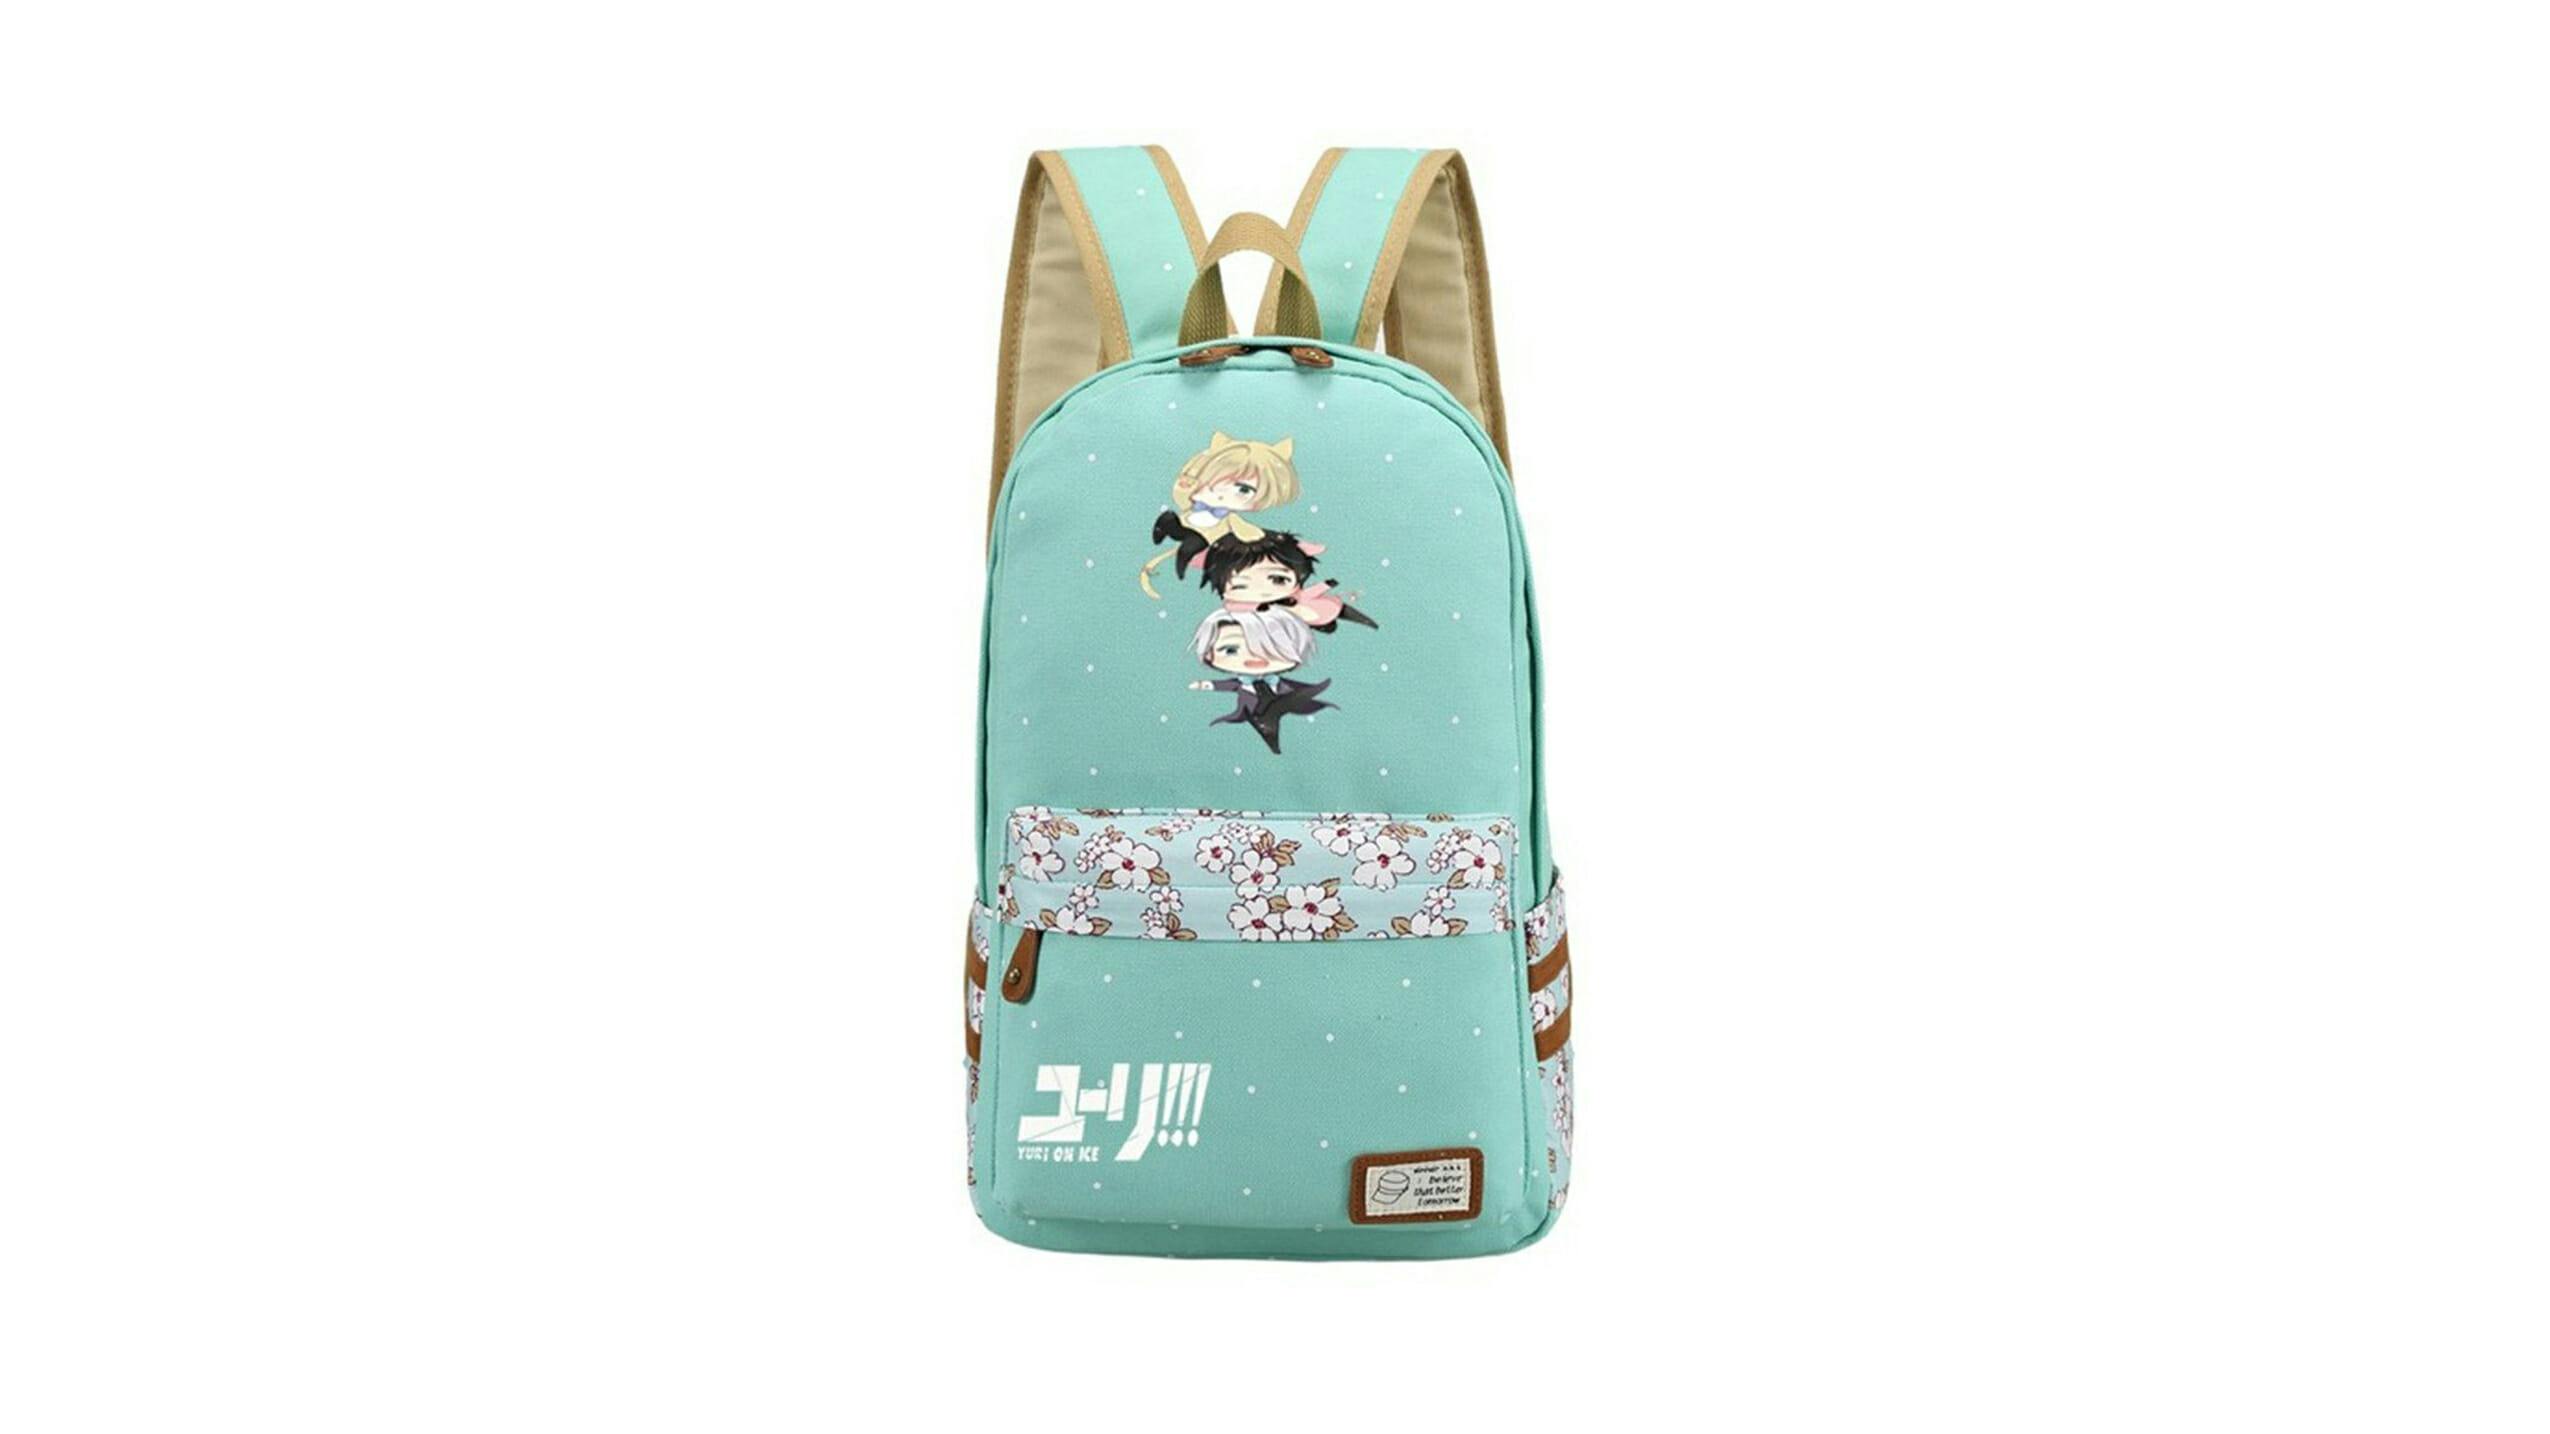 Senpai, please notice me (and these awesome anime backpacks)